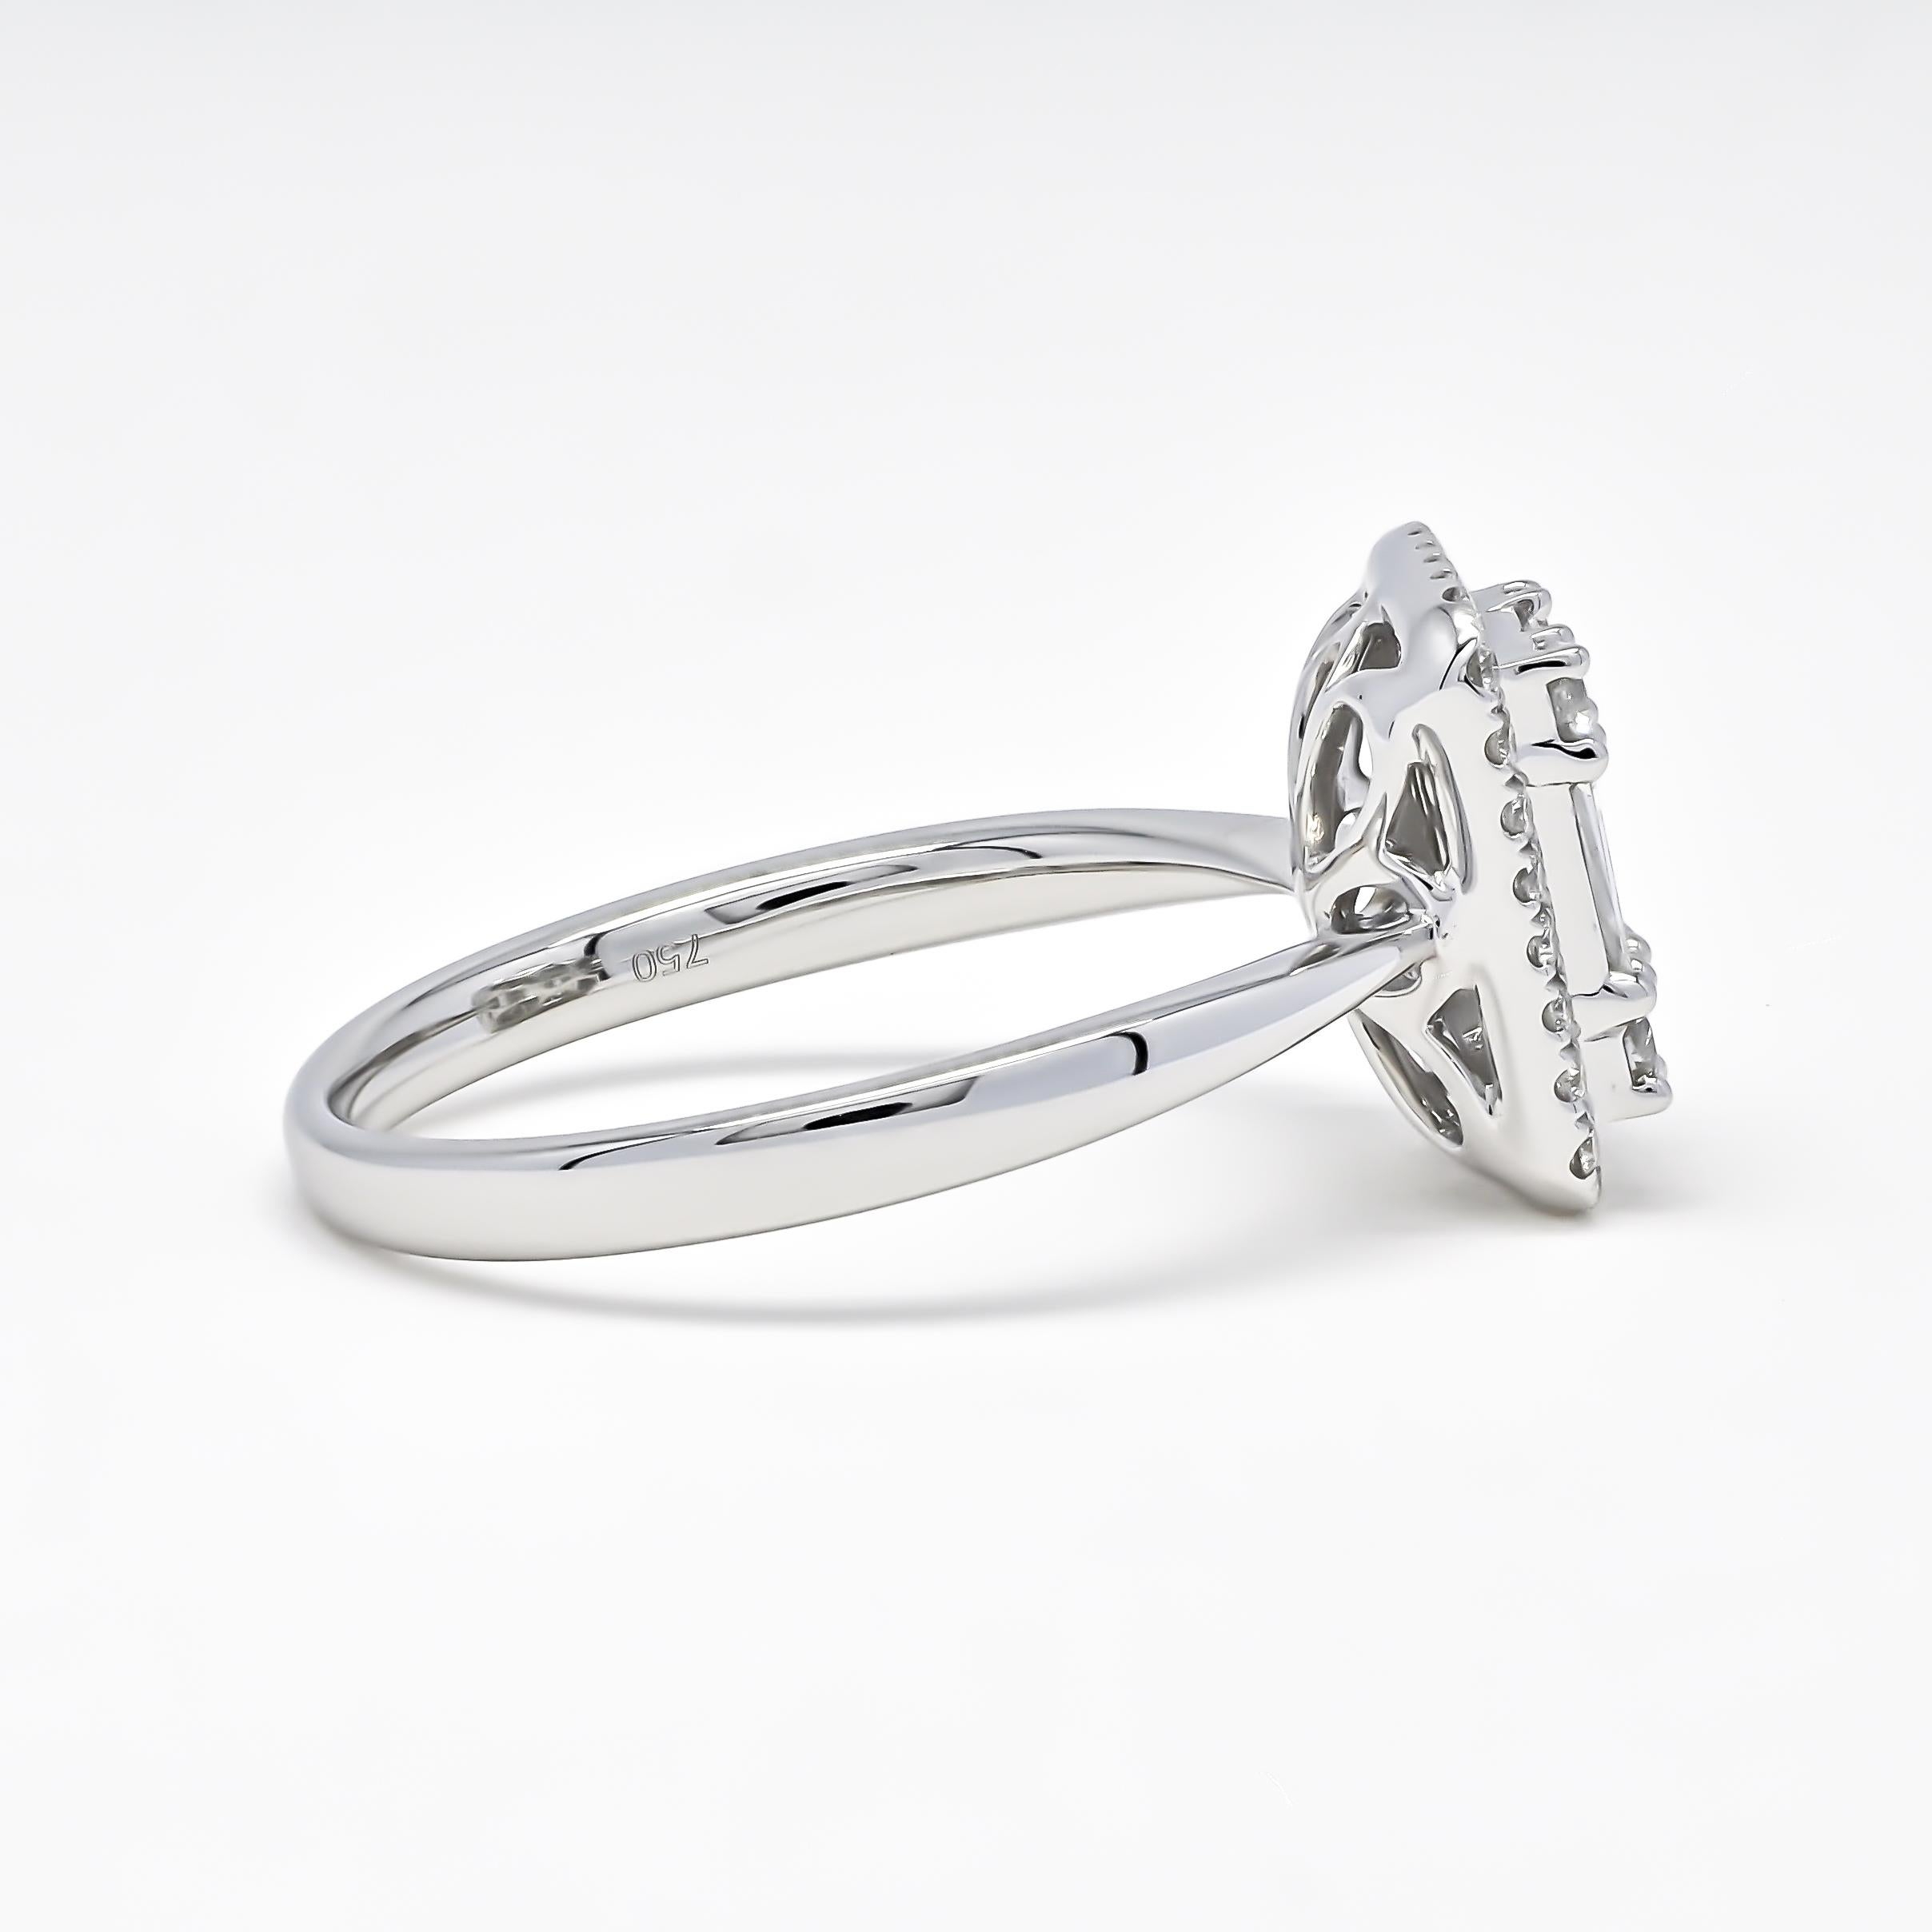 A diamond cluster ring with baguette and round diamonds is a beautiful and sophisticated choice for a dainty engagement ring. The ring features a cluster of diamonds in the center, which includes both round and baguette-cut diamonds, adding a unique